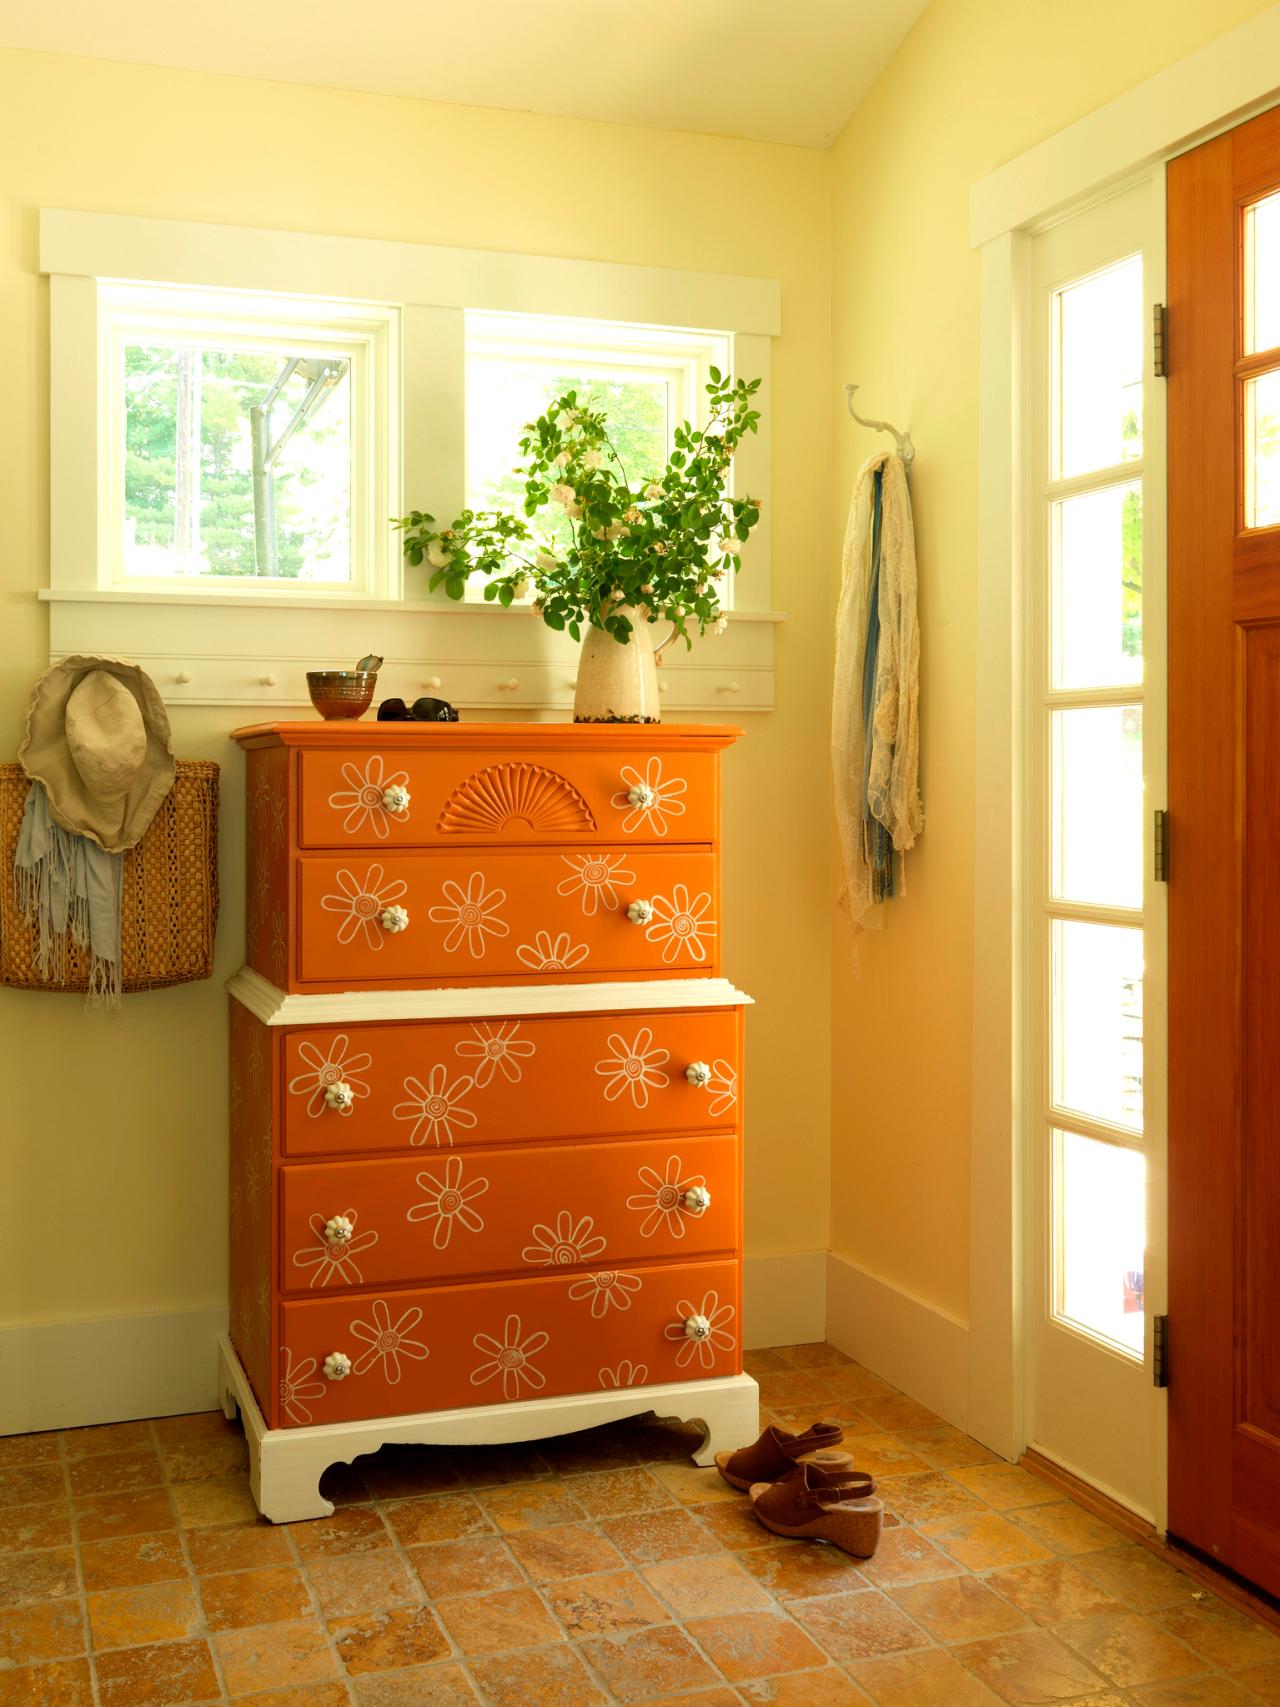 How To Paint A Retro Fl Design On, Dresser With Flowers